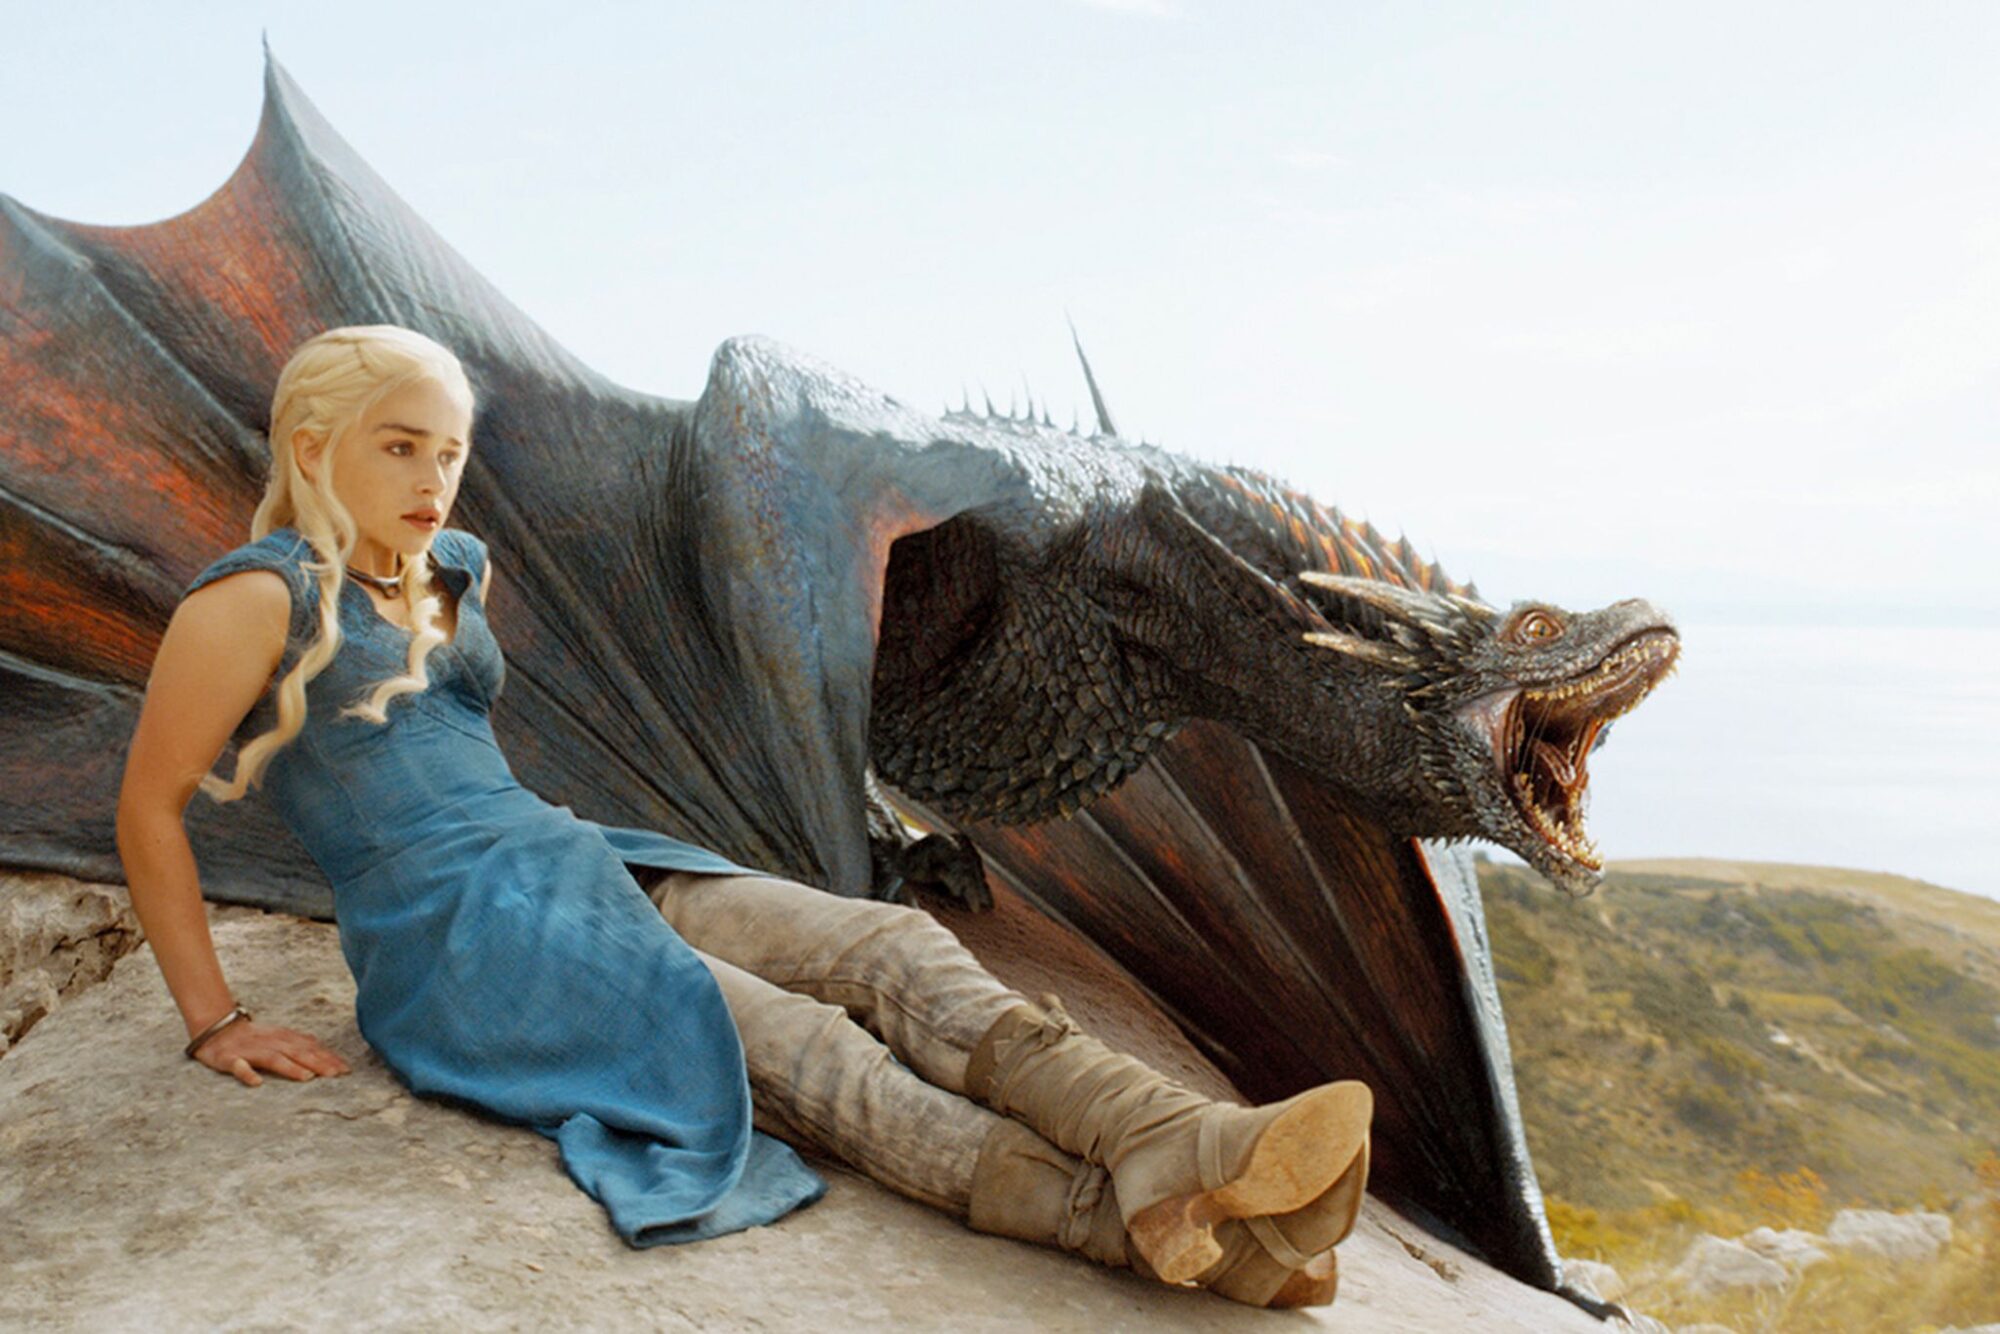 Game Of Thrones Season 4 Story Summary and Reviews